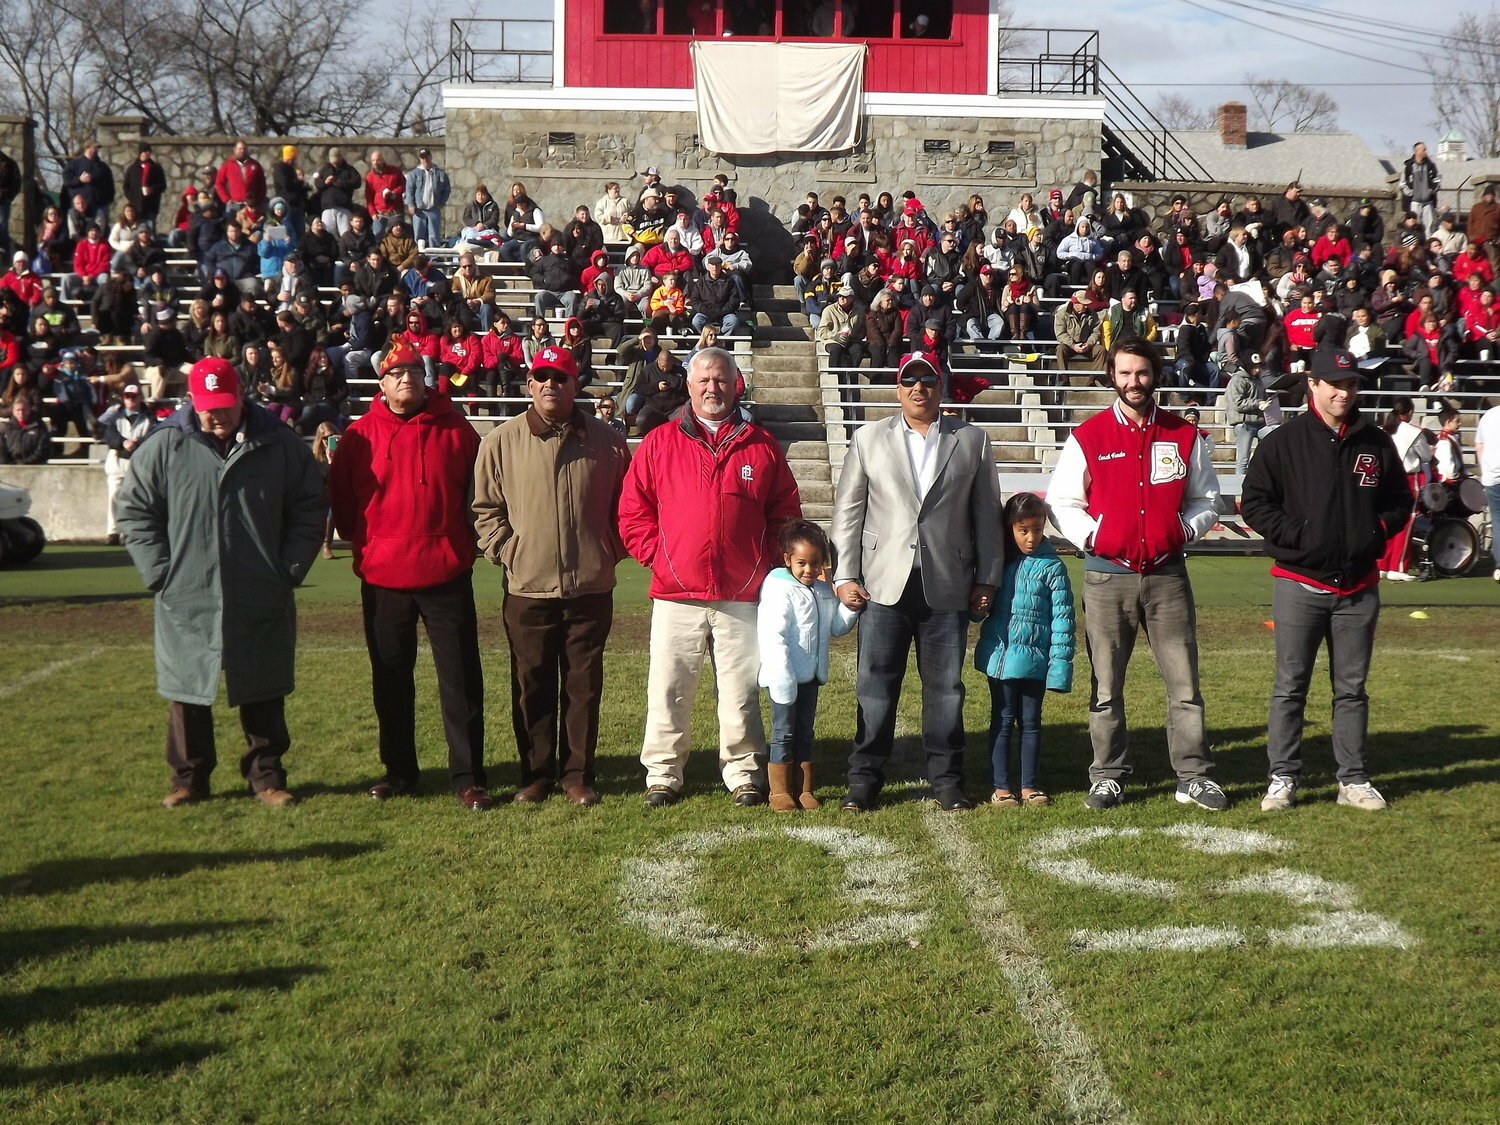 Representing 7 decades of Townie football from the 1940s to 2000s L to R, Bill Stringfellow, Harry Edmonds, Junior Butler, Jim Rose, Matt Lopes, Joe Wahl and Jaime Silva at 2014 game